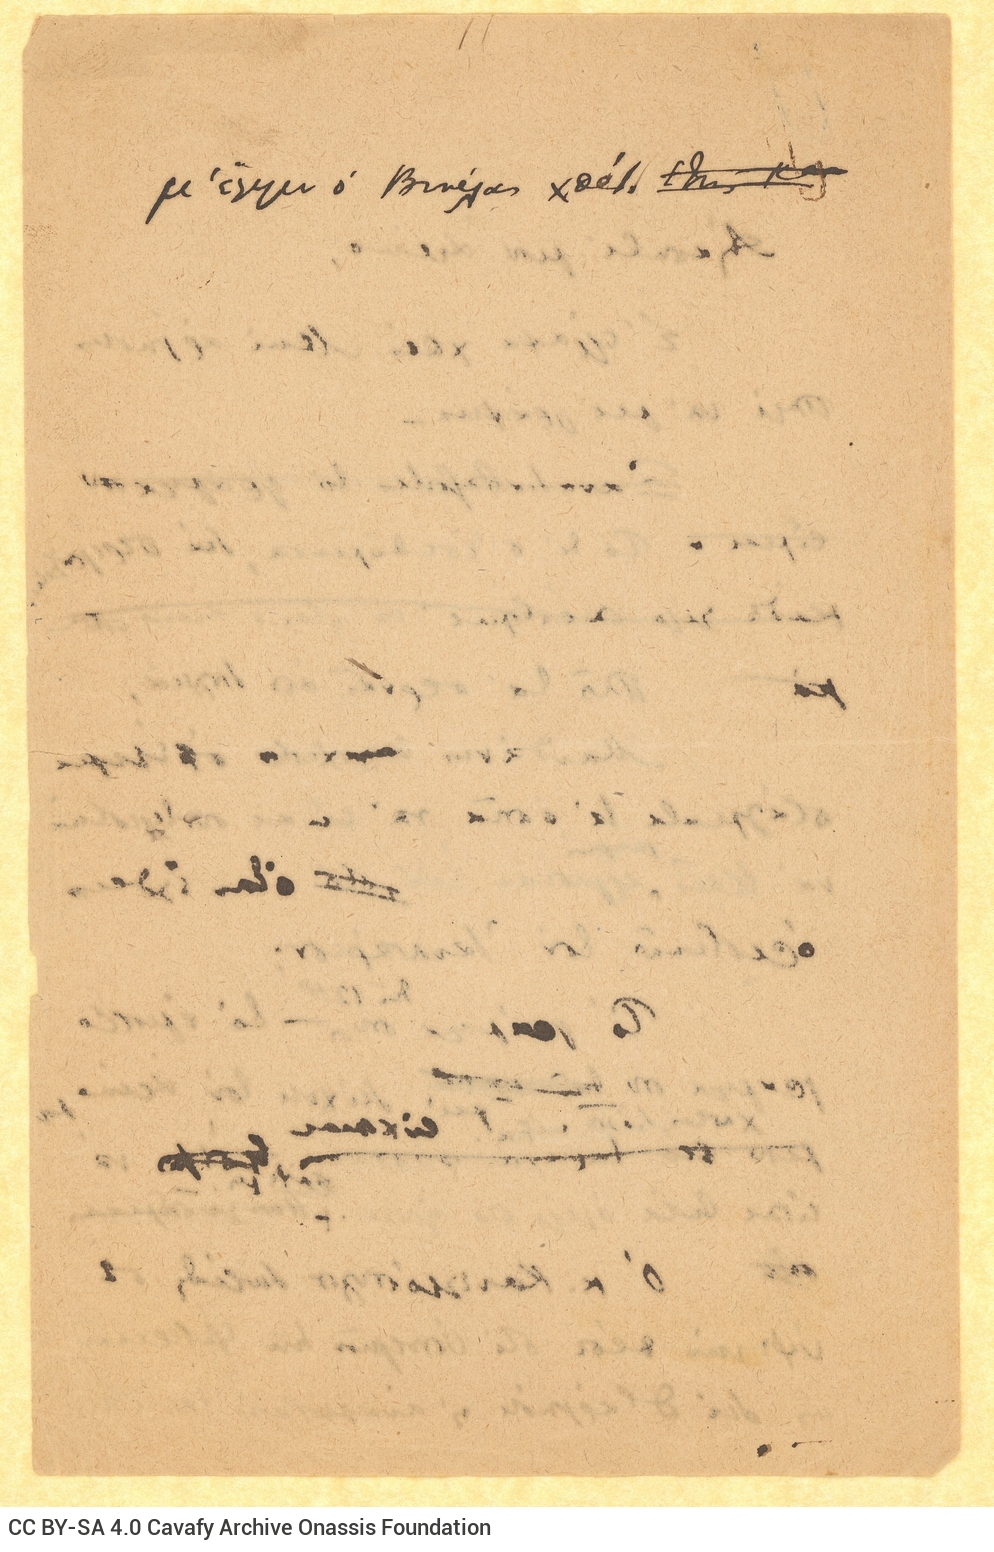 Draft letter by Cavafy to Alekos [Singopoulo] on both sides of a sheet. Cancellations. The poet wishes to learn Singopoulo's 